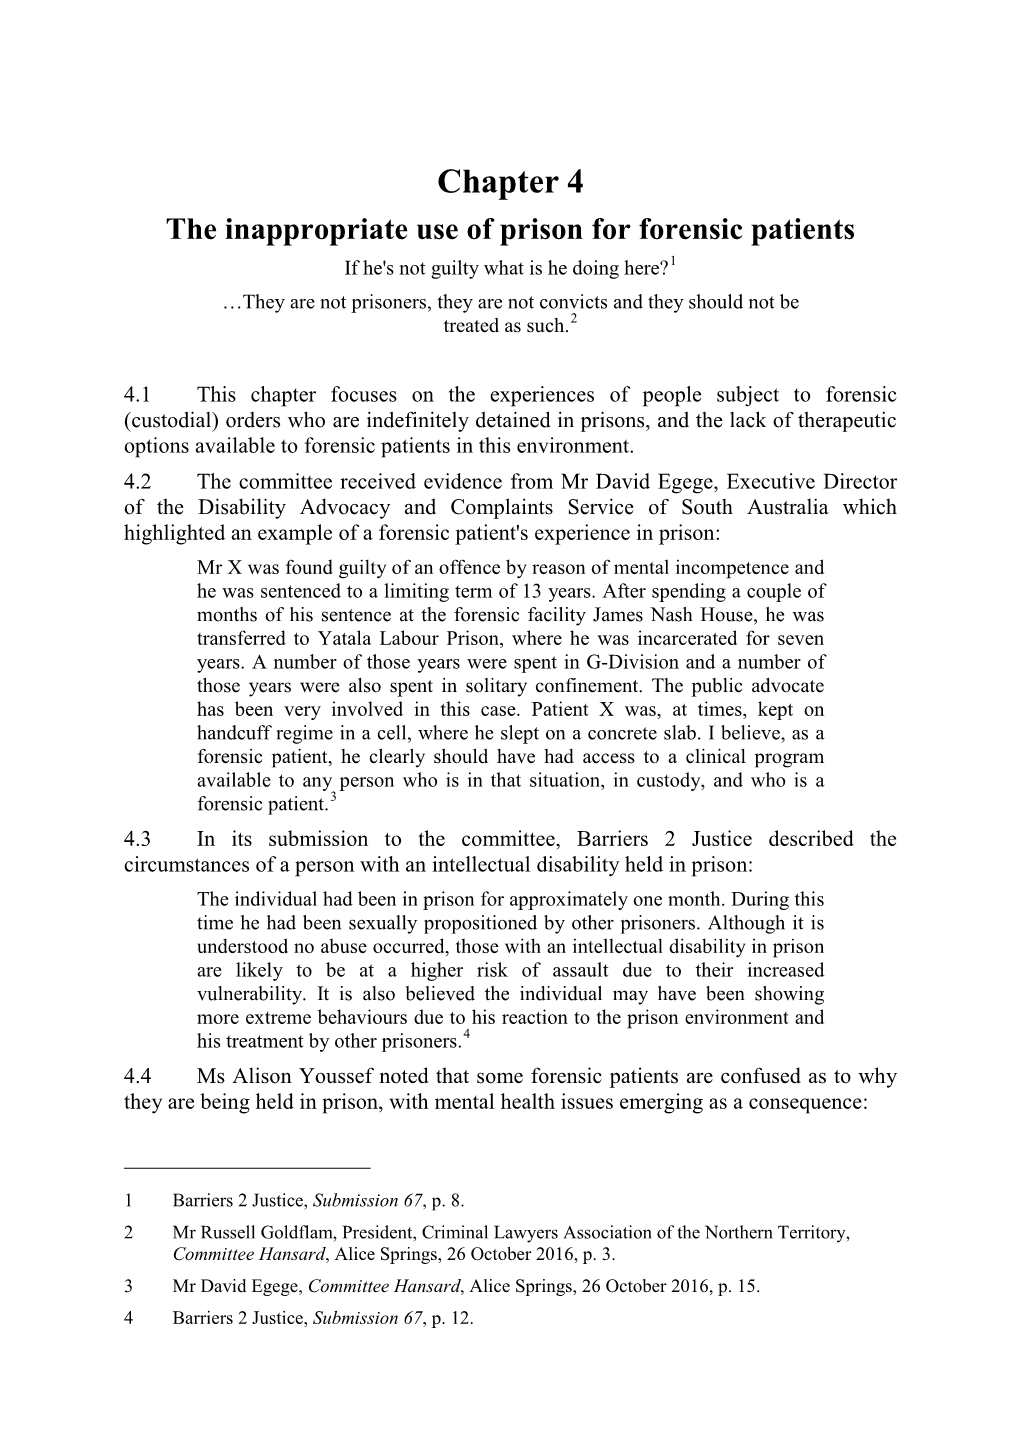 Chapter 4 the Inappropriate Use of Prison for Forensic Patients